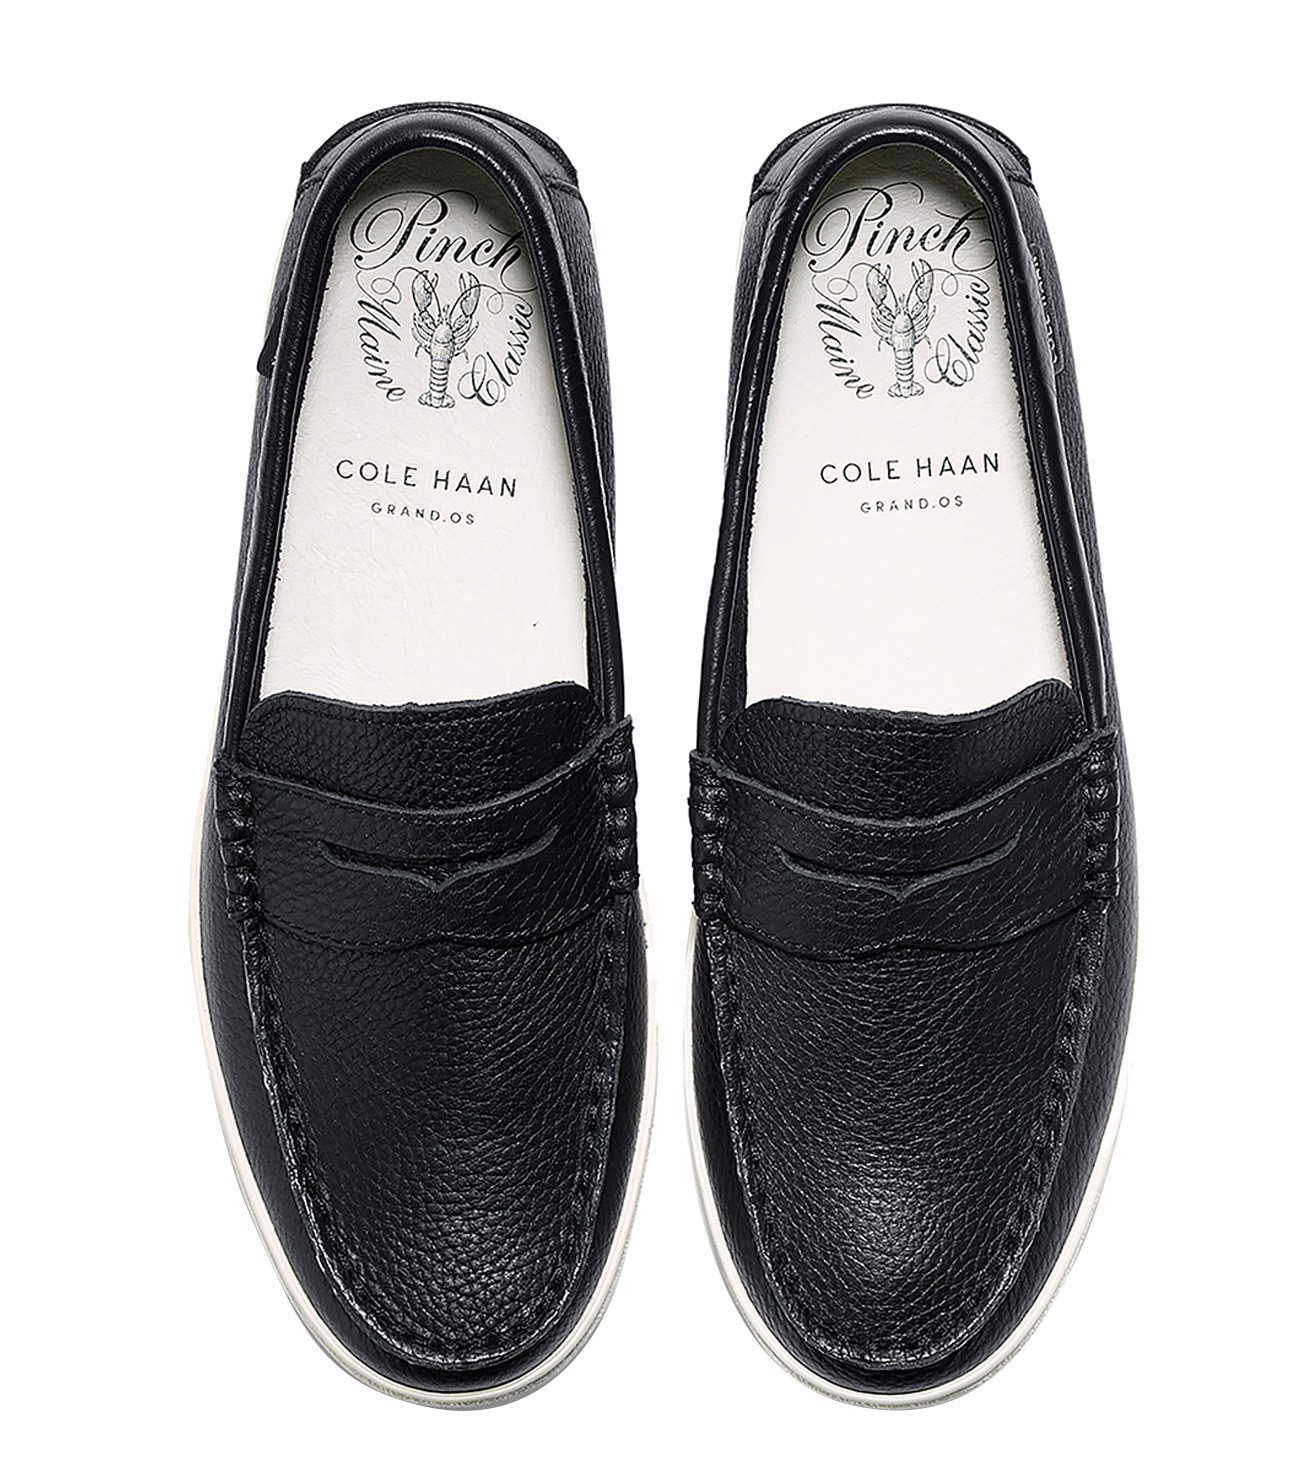 cole haan grand os black loafer